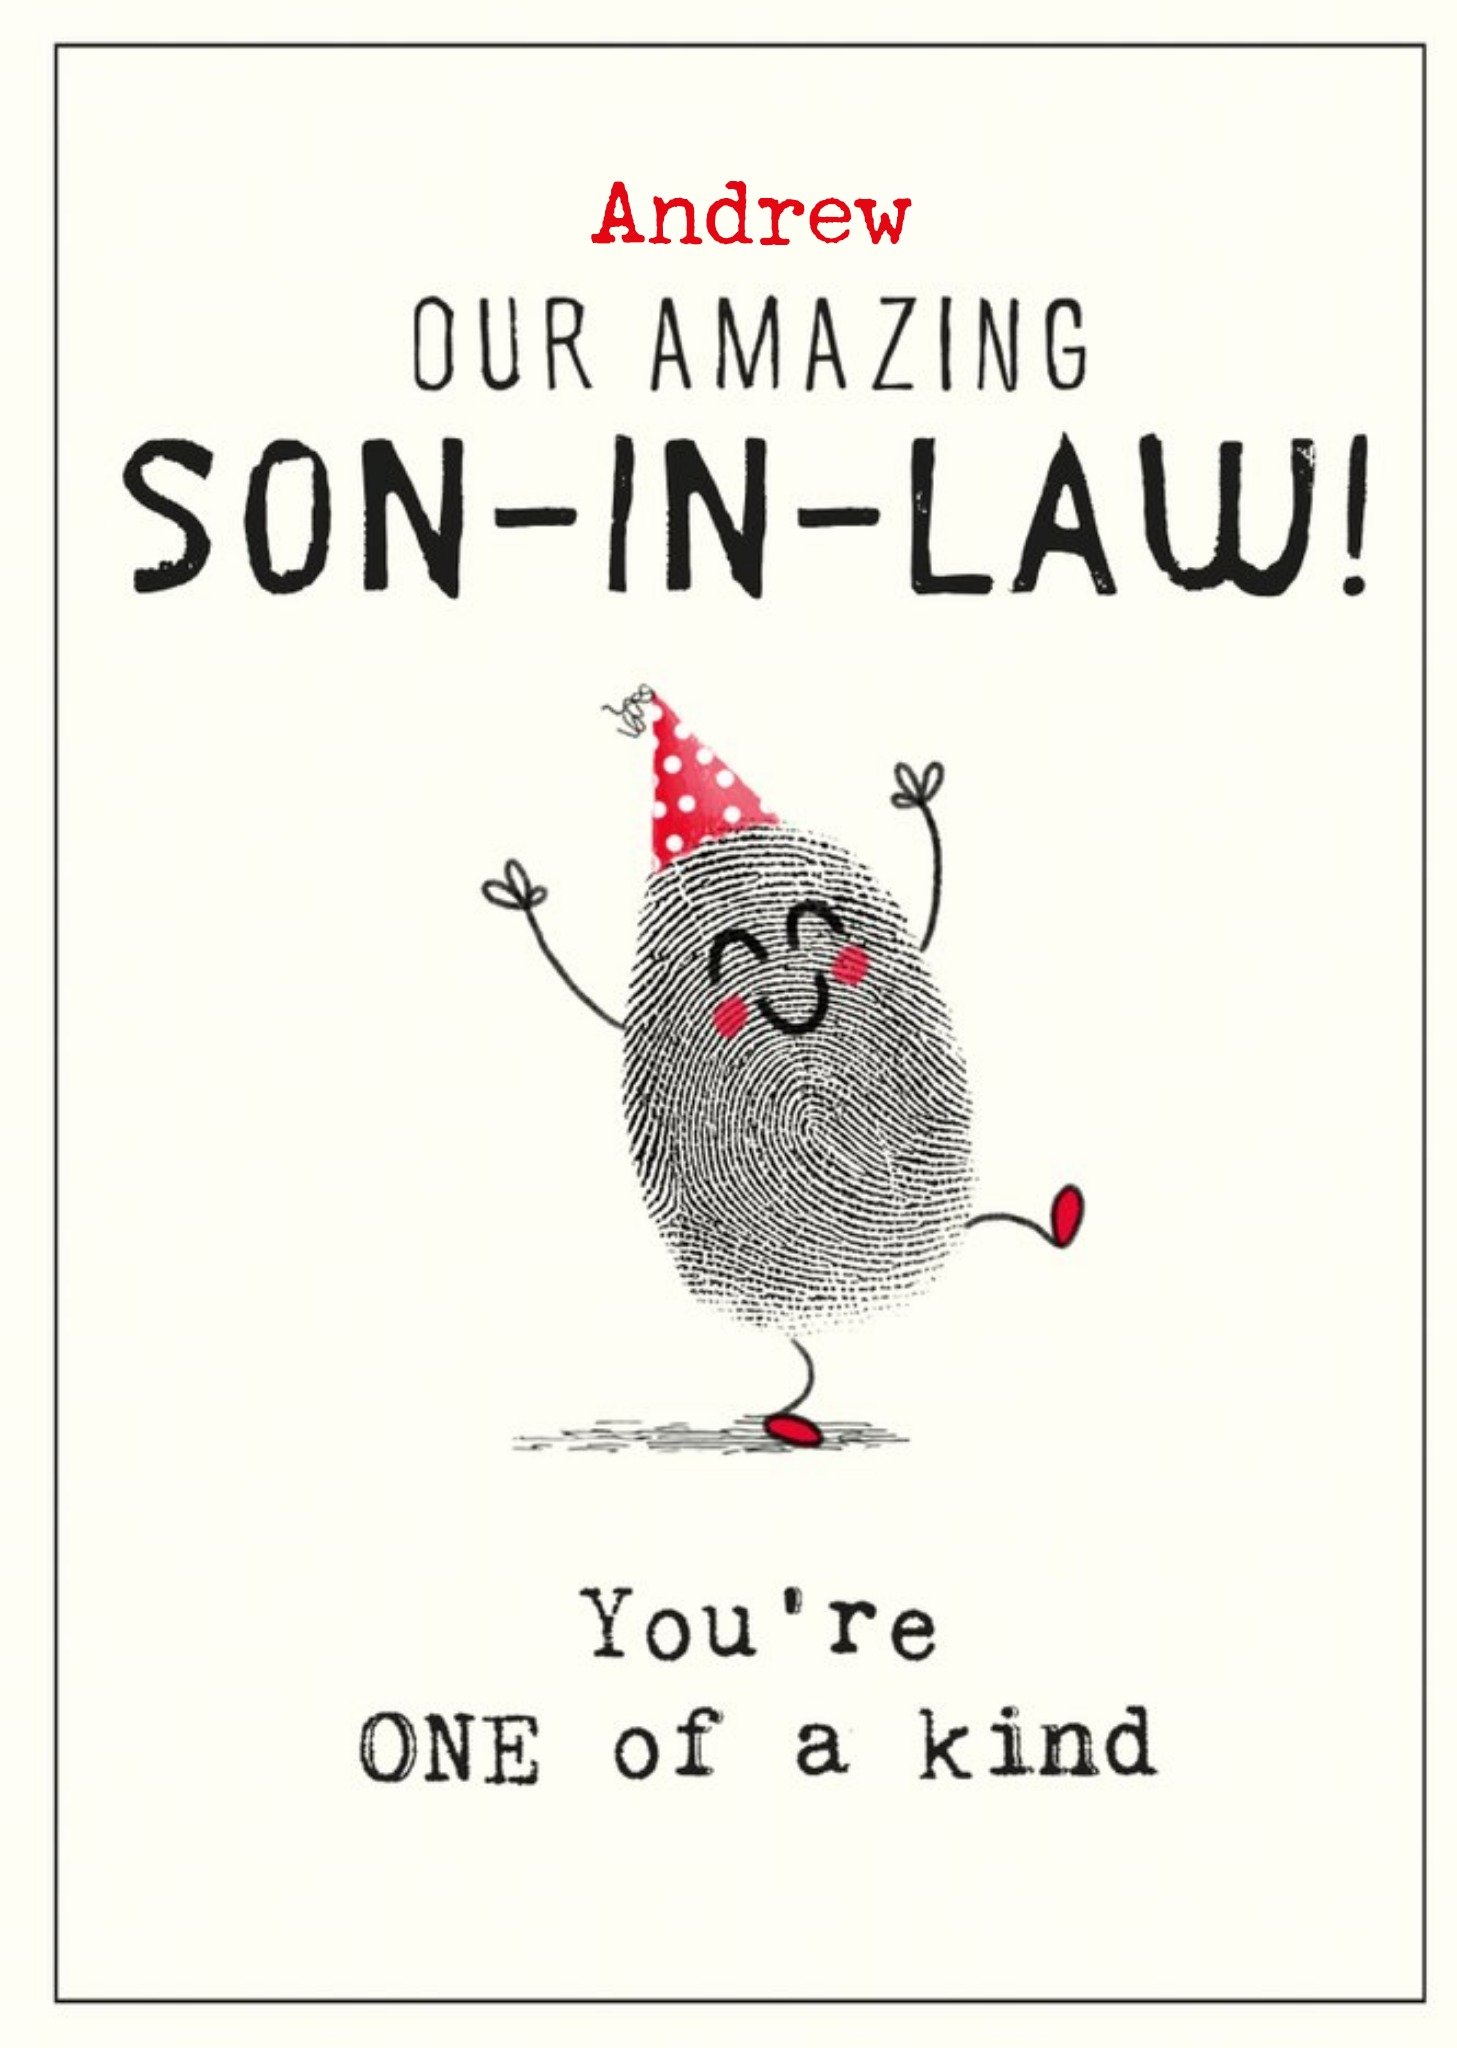 Moonpig Fun Illustration Of A Fingerprint Our Amazing Son In Law You're One Of A Kind Card Ecard